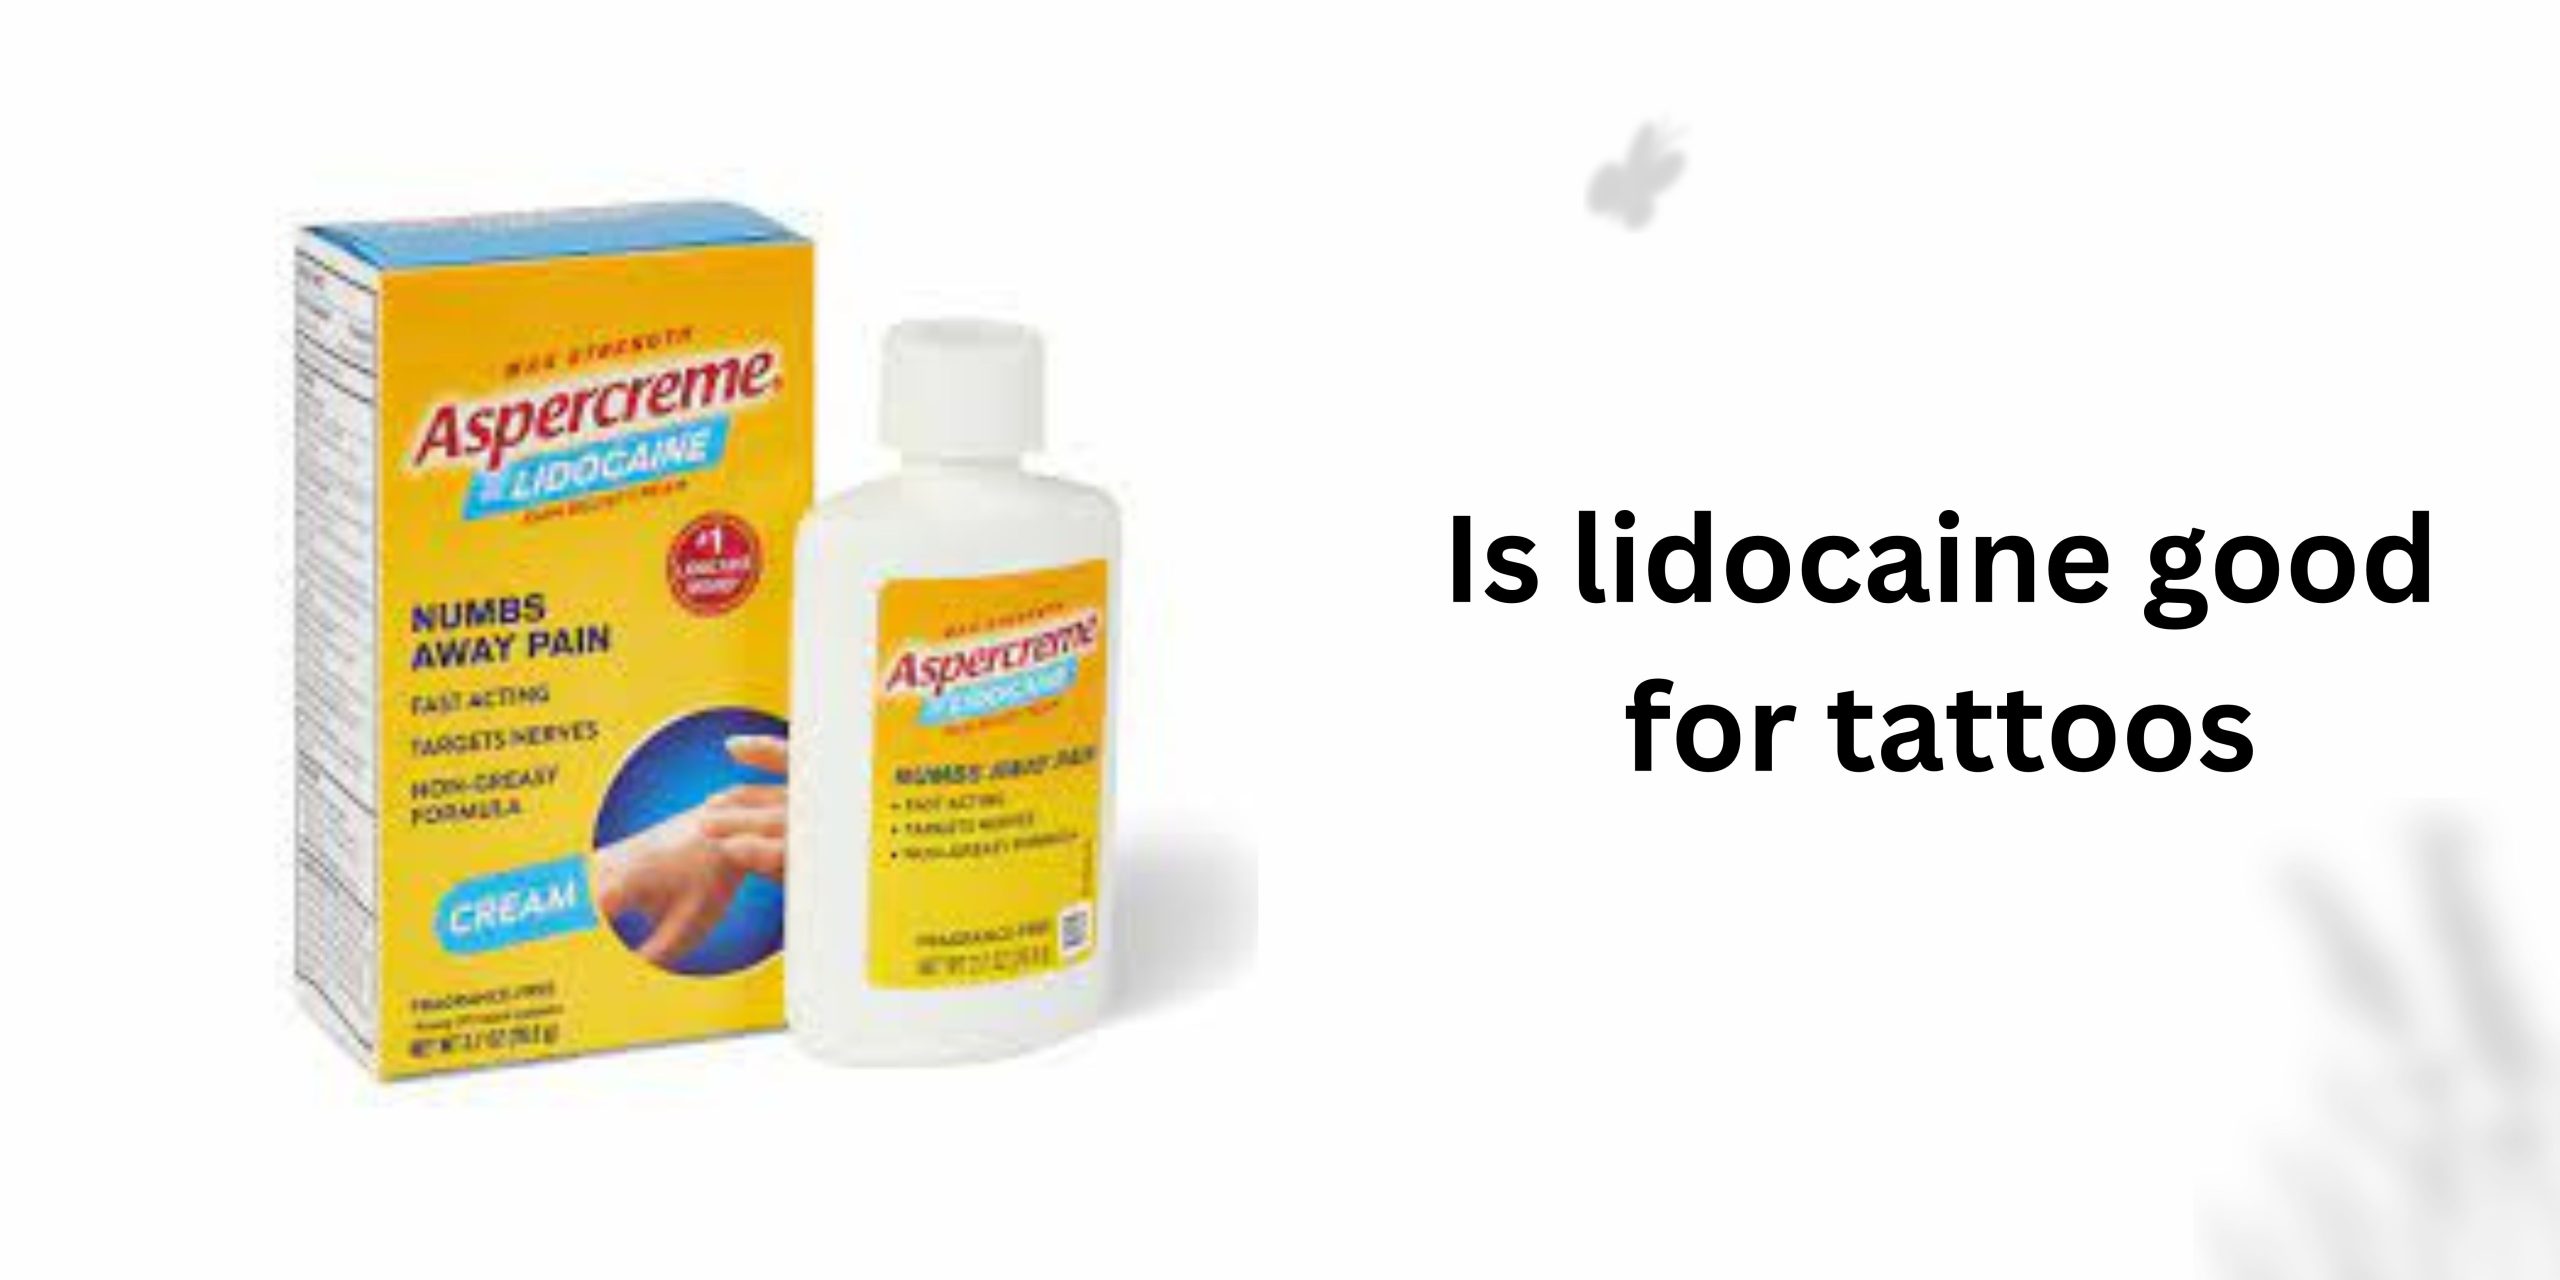 Is lidocaine good for tattoos